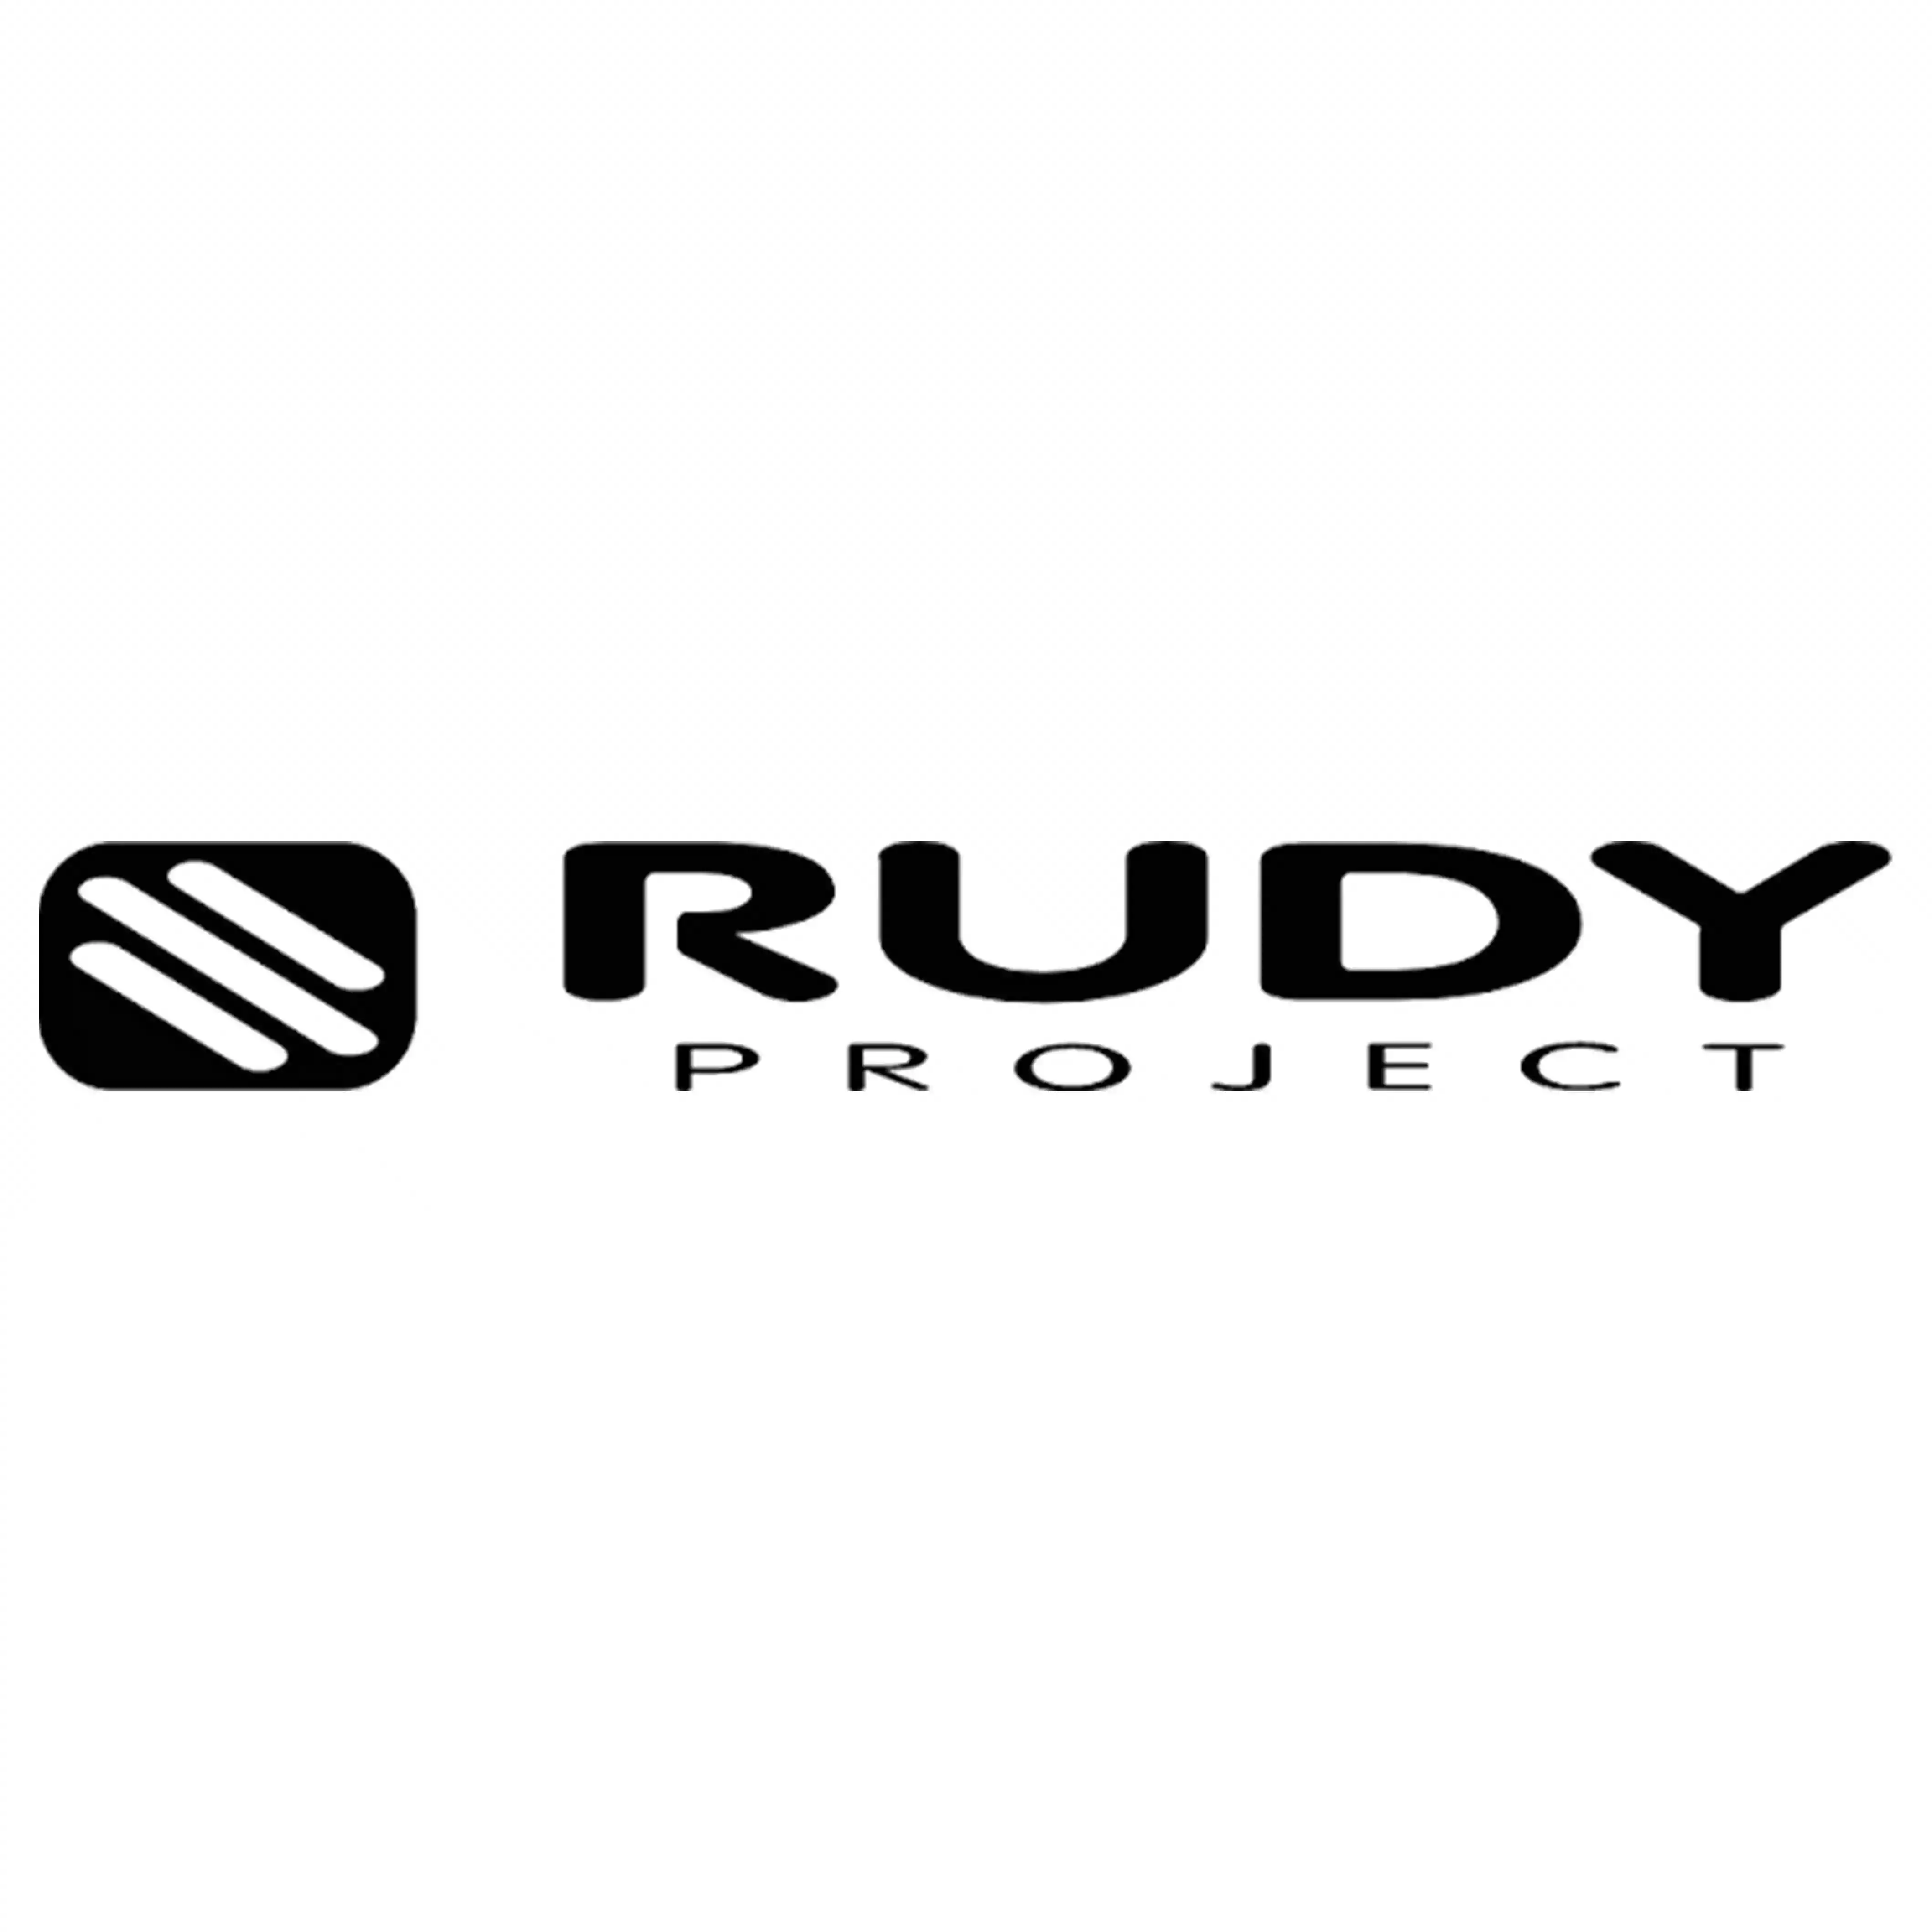 Rudy Project NA